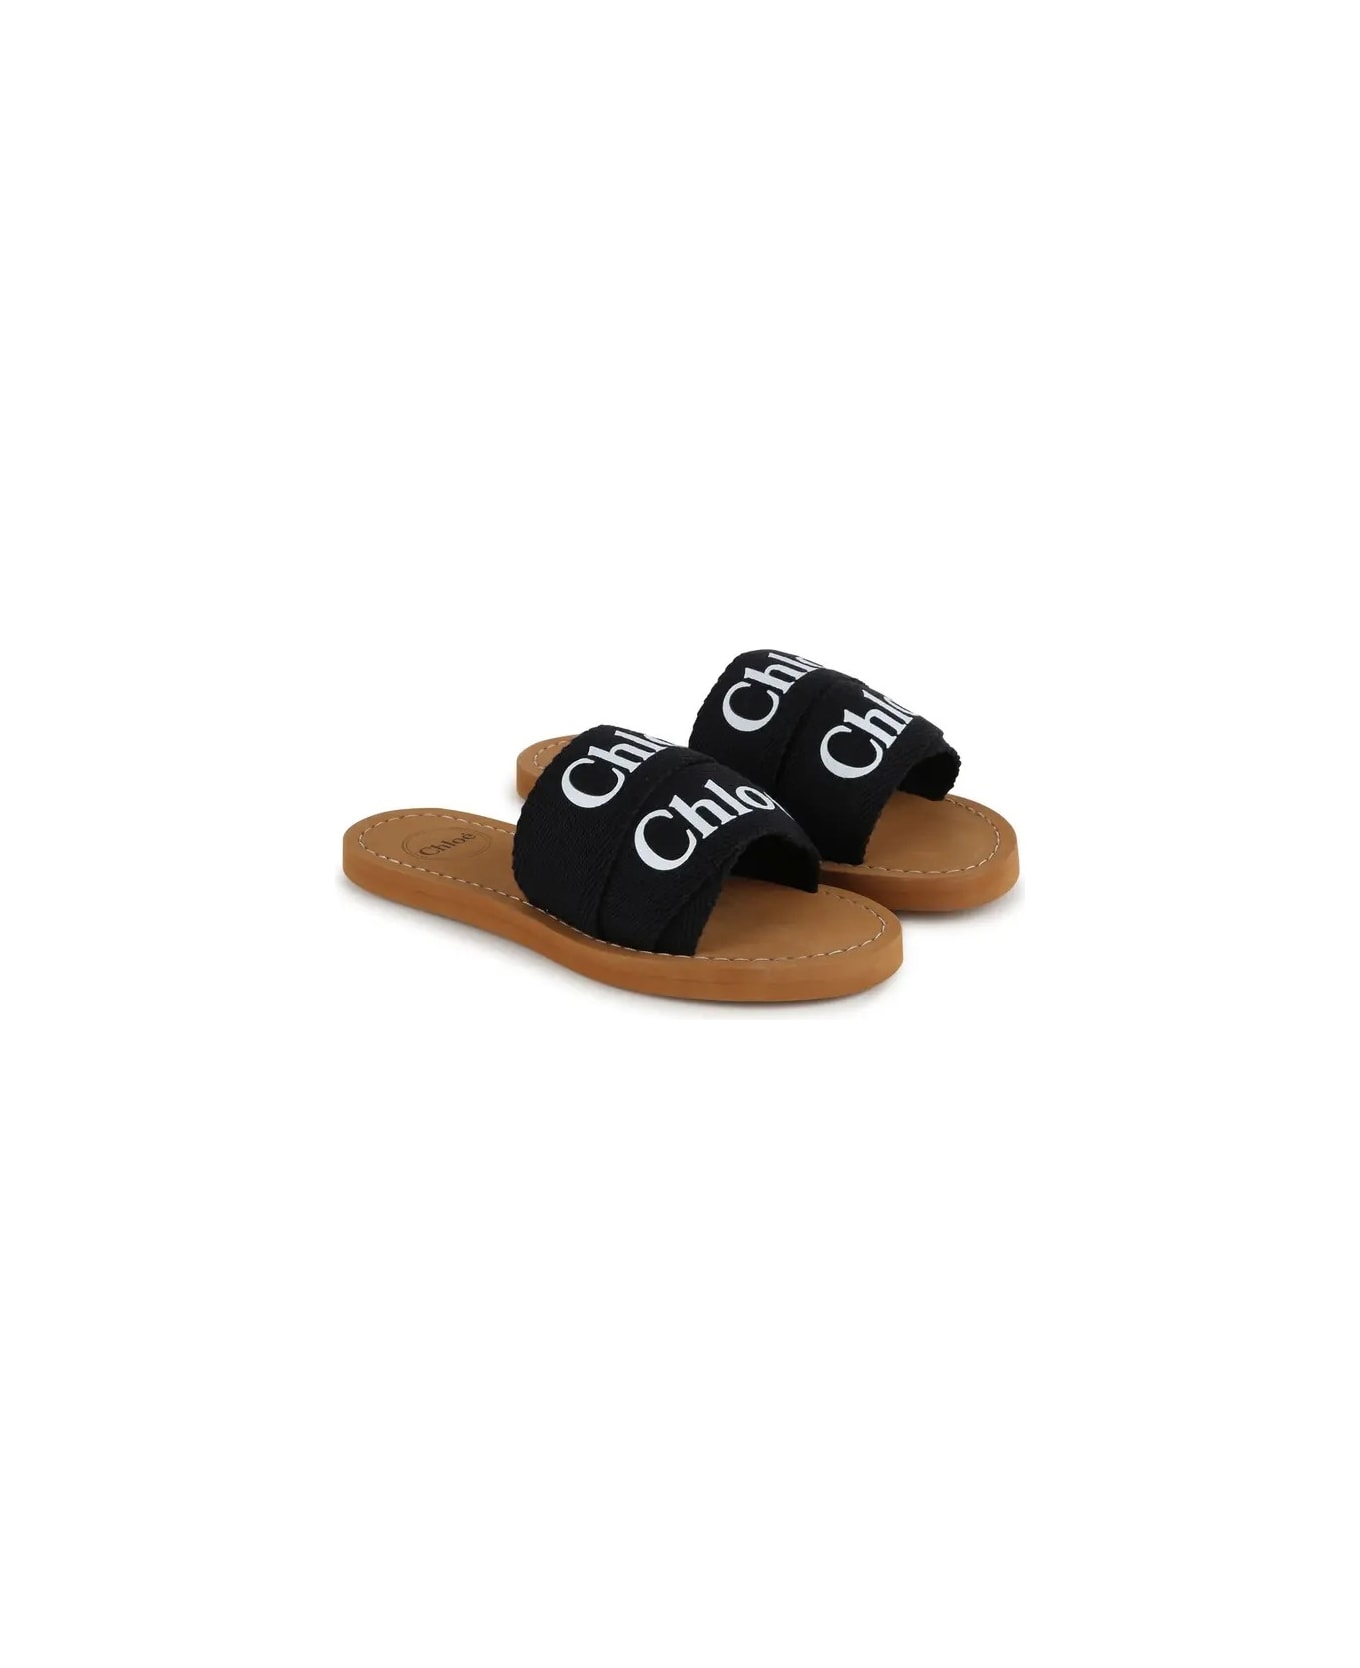 Chloé Woody Sandals In Black Canvas With Logo - Black